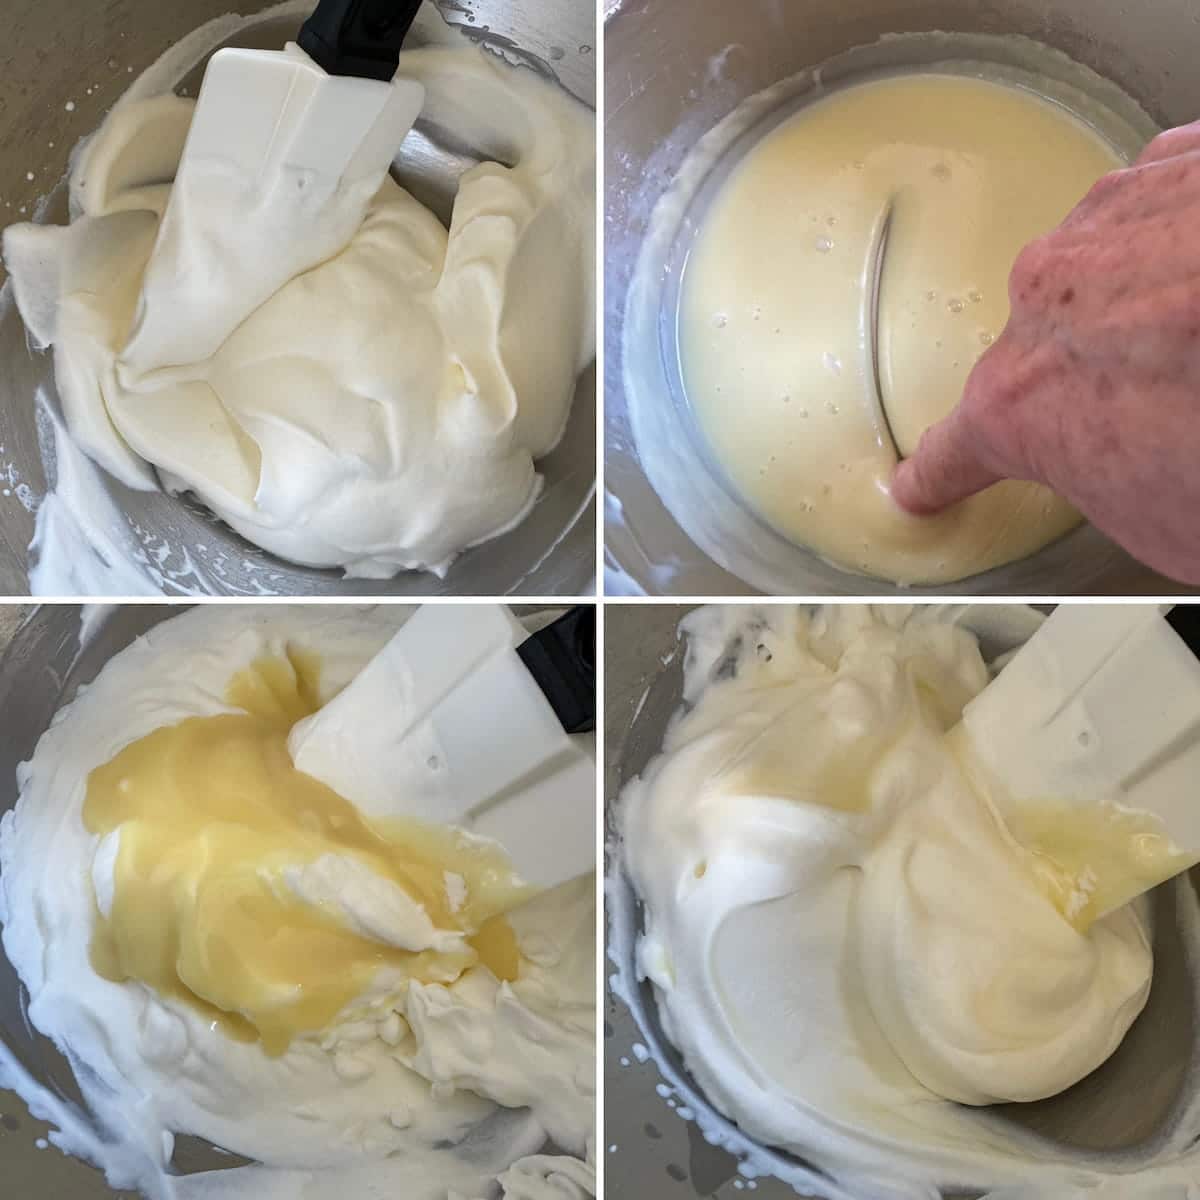 steps in whipping up cream and adding melted white chocolate